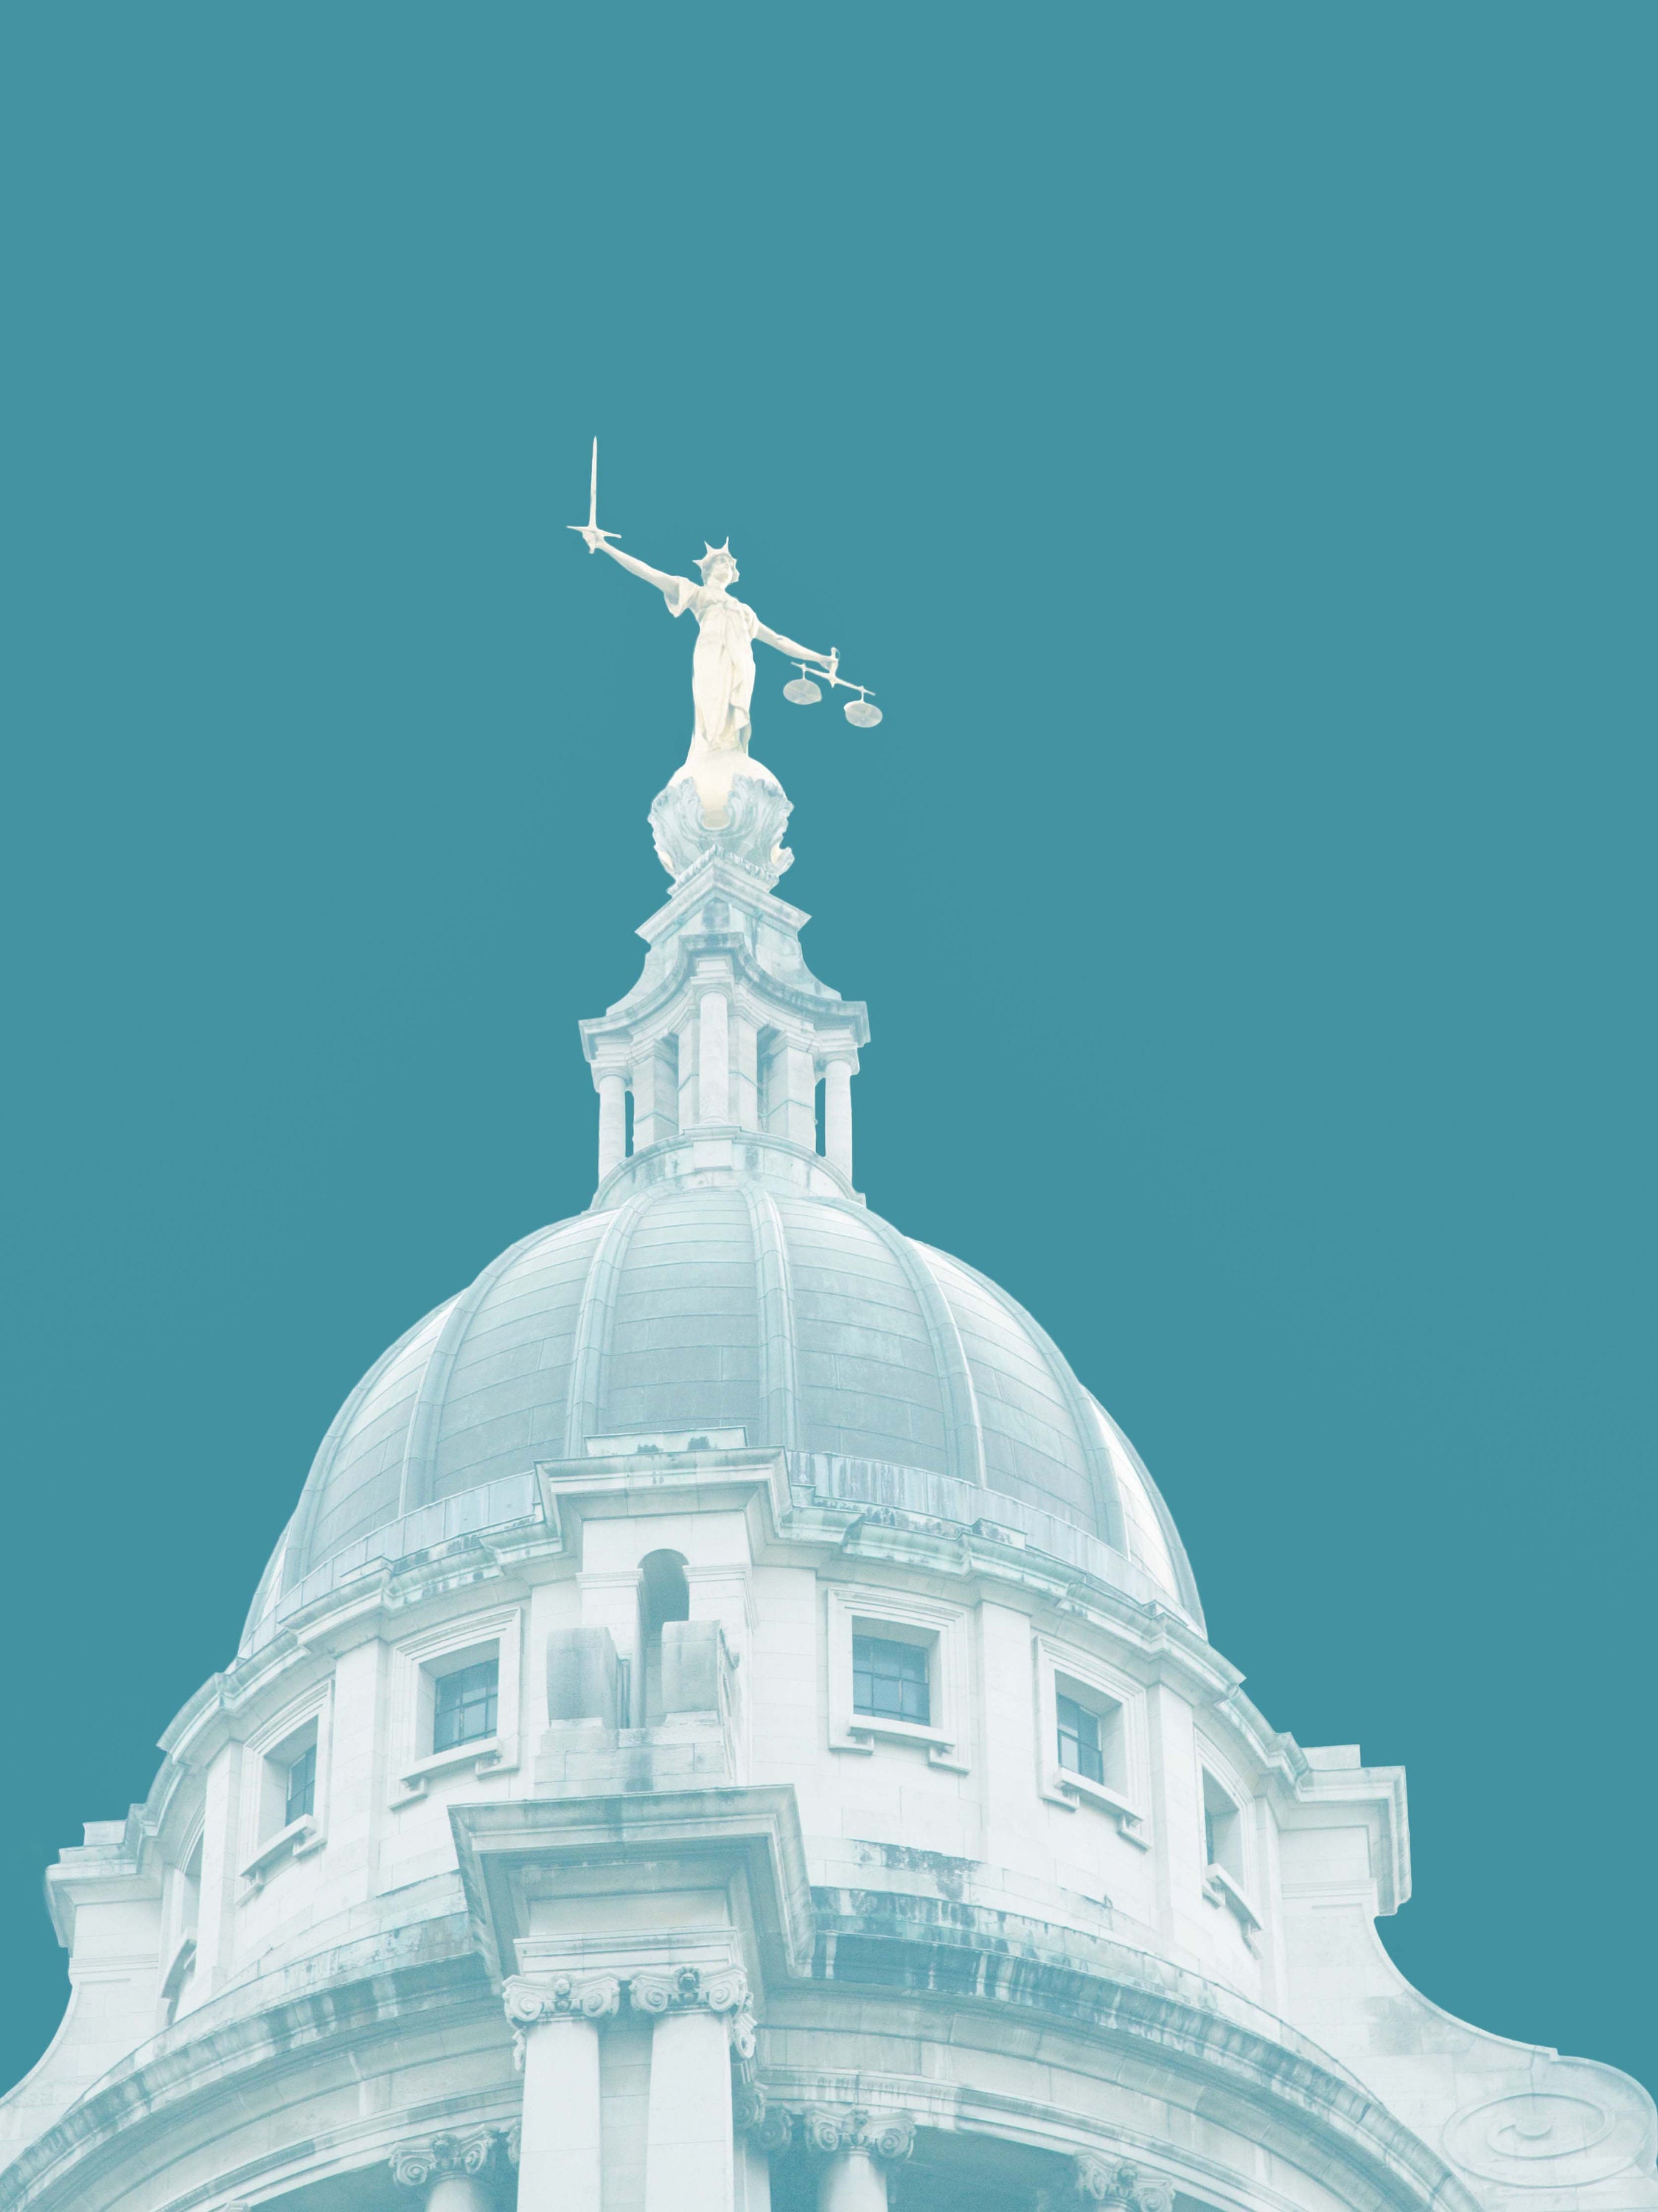 london old bailey fine art print in teal green blue lawyer gift barrister gift by deborah pendell